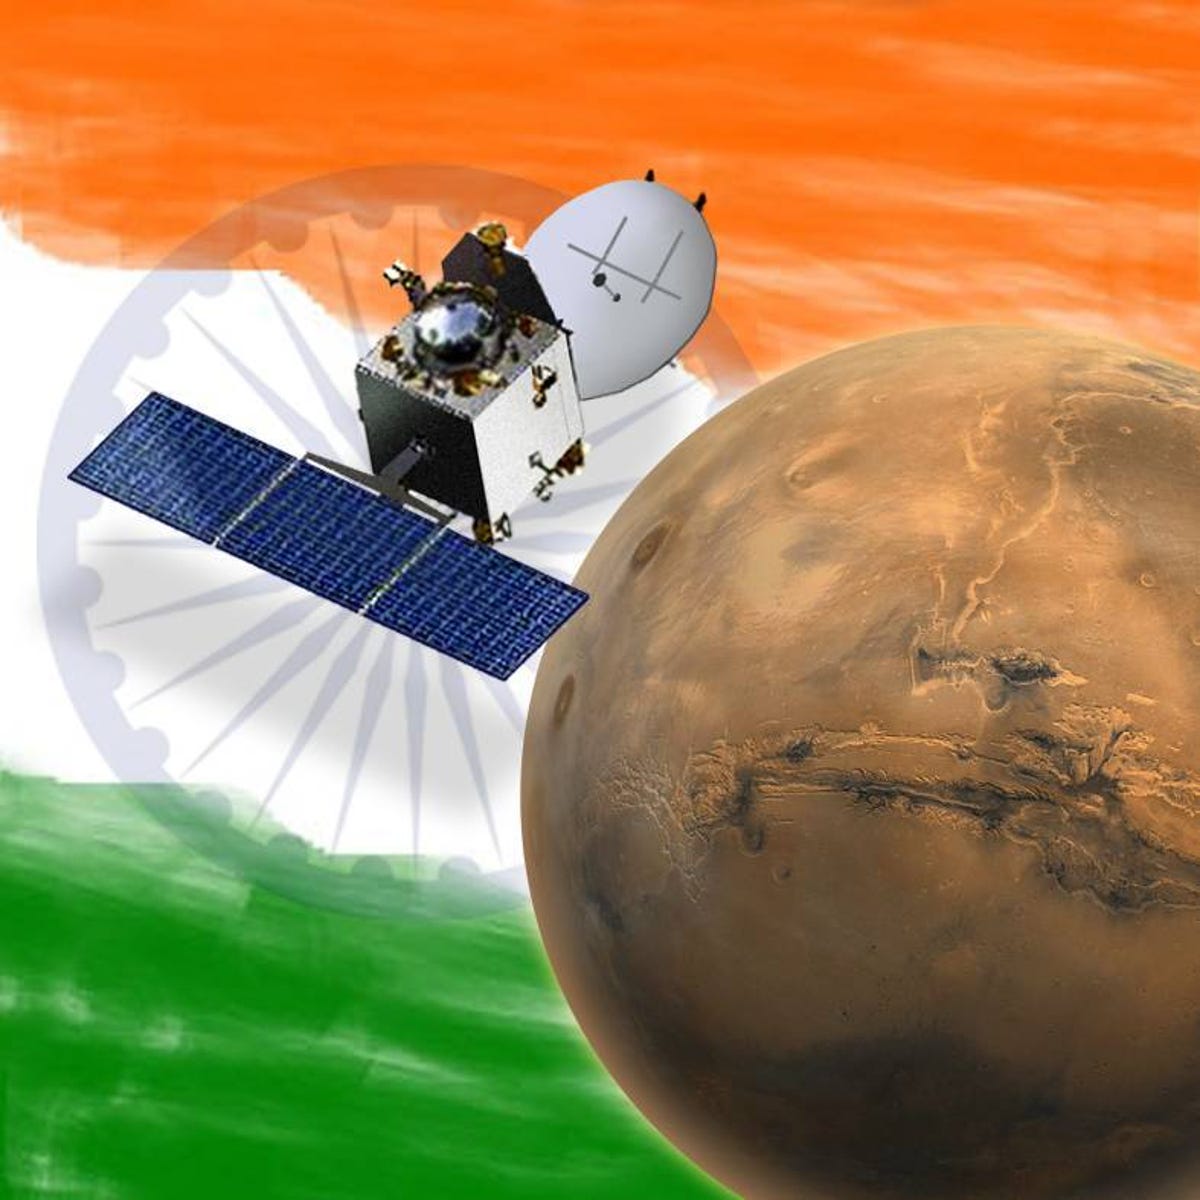 An Indian flag is seen in the background, upon which Mangalyaan is seen with Mars.